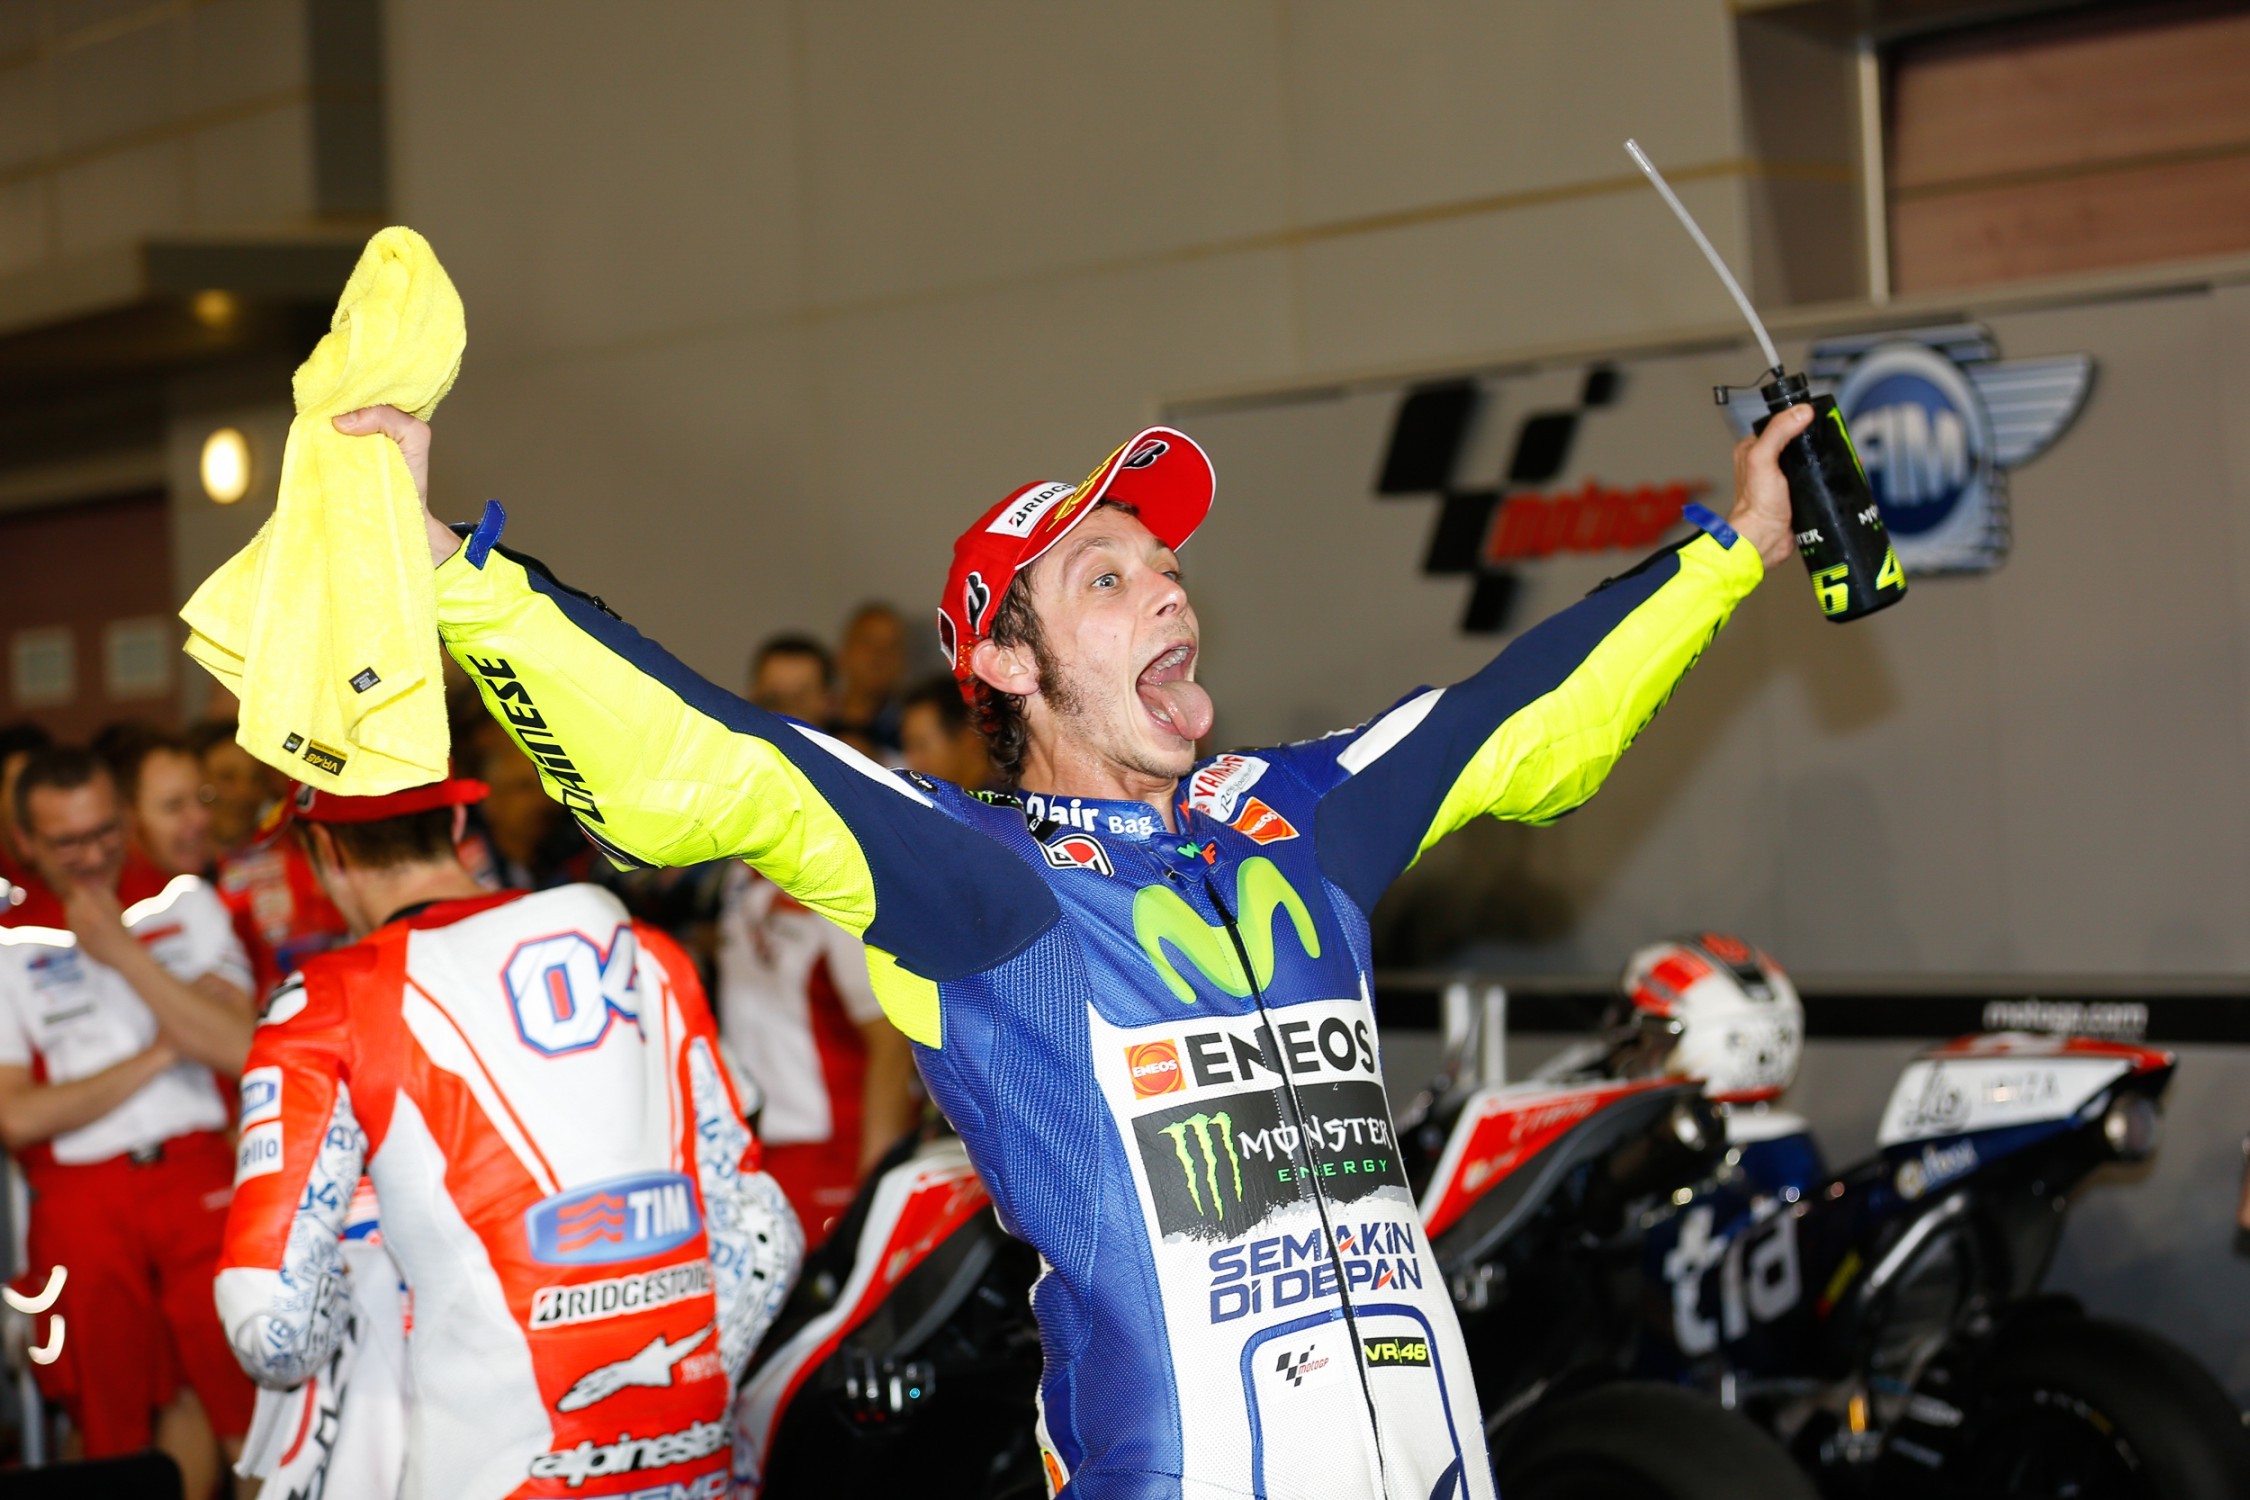 Rossi 2015 Debut Race in Ducati Blows Competition -